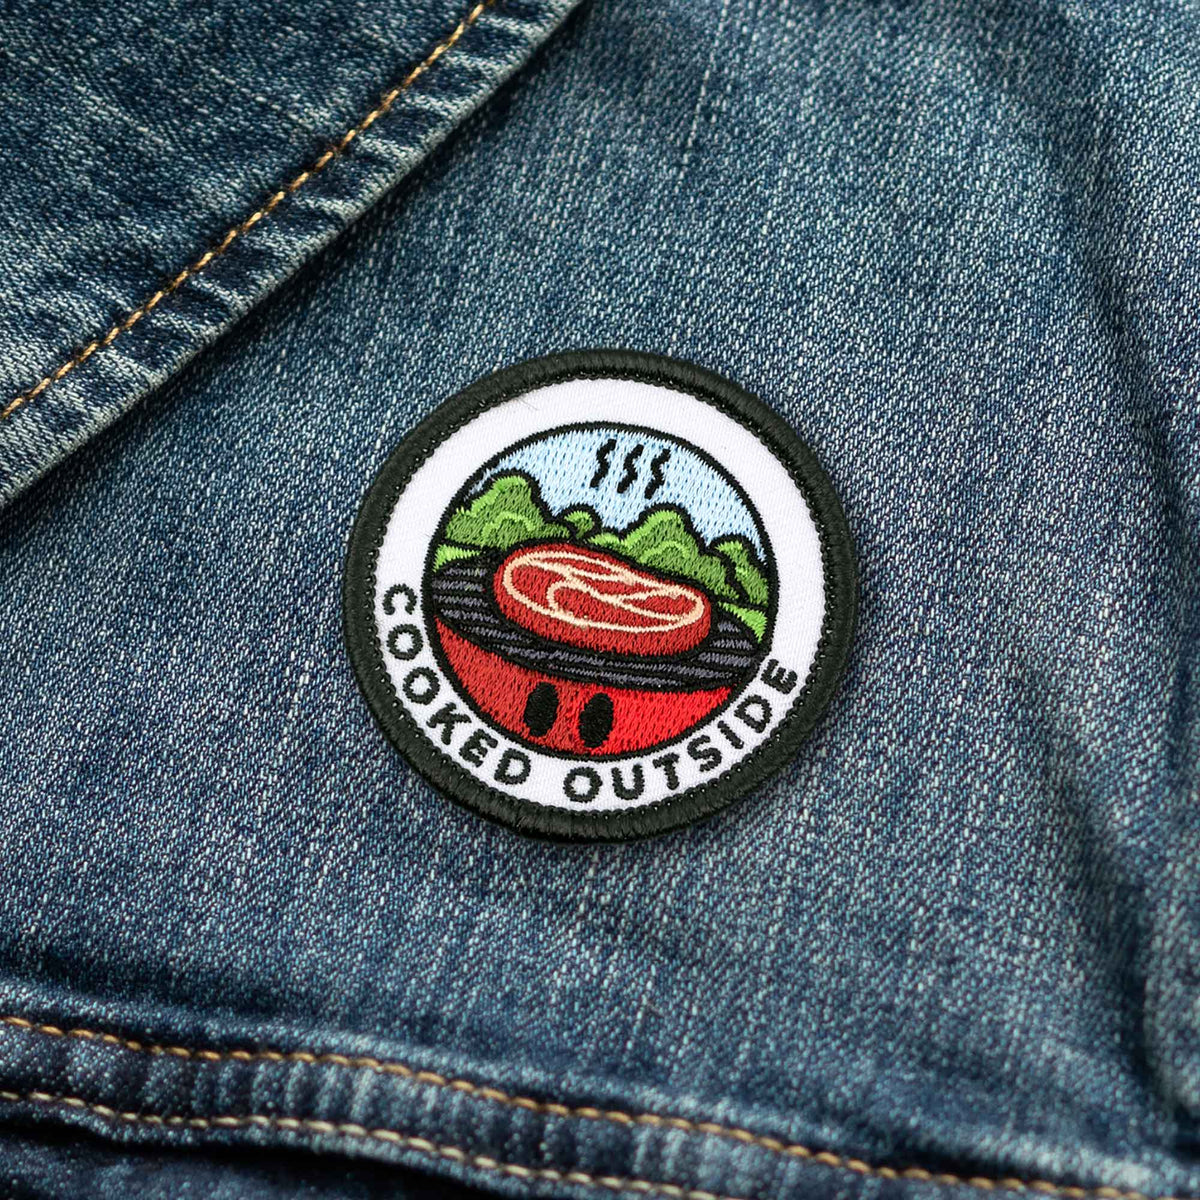 Cooked Outside adulting merit badge patch for adults on denim jacket